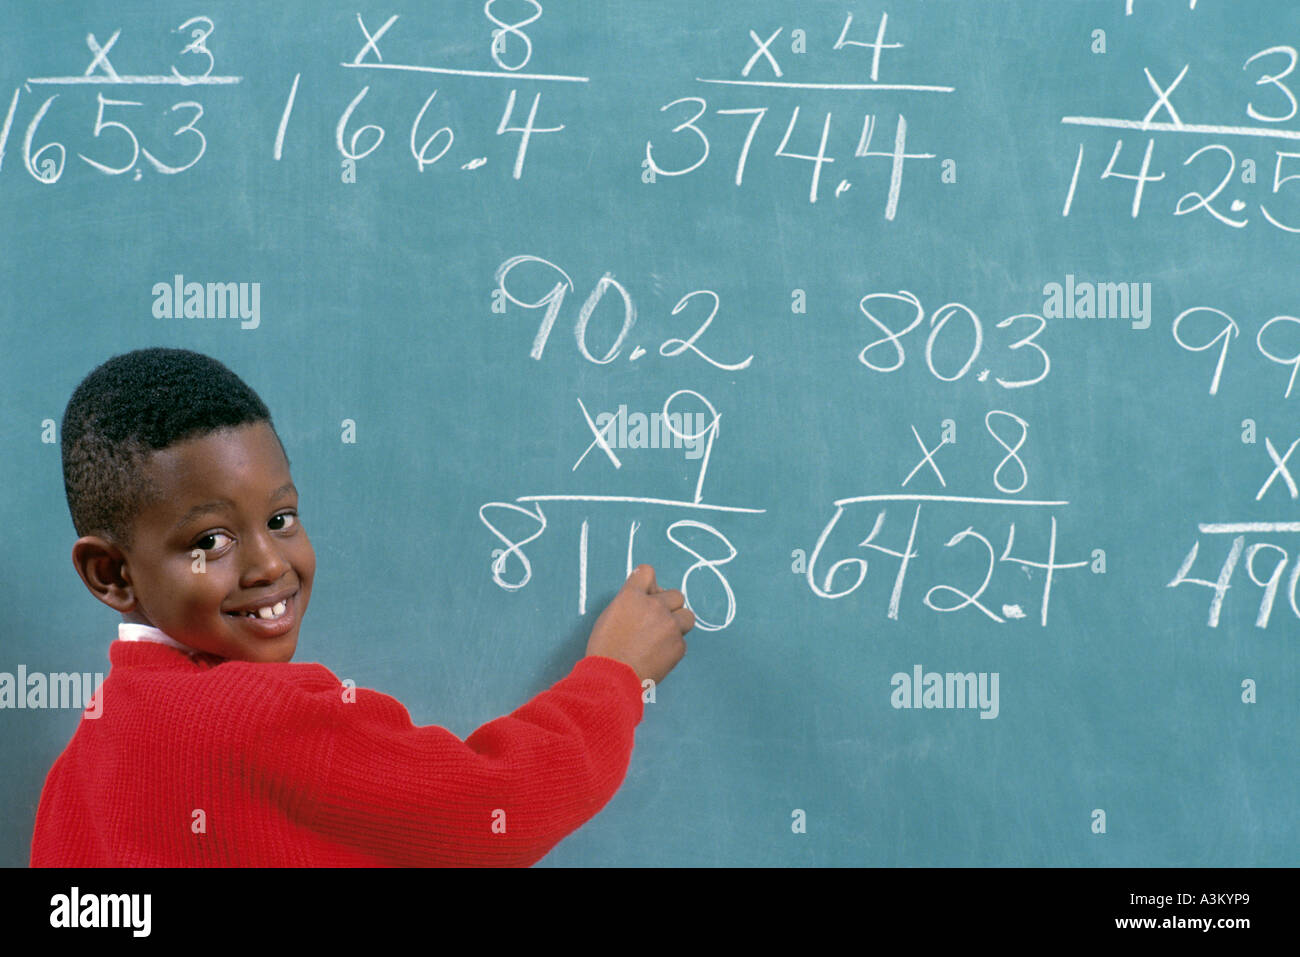 African American male student solving math problems on chalk board in elementary school class Stock Photo